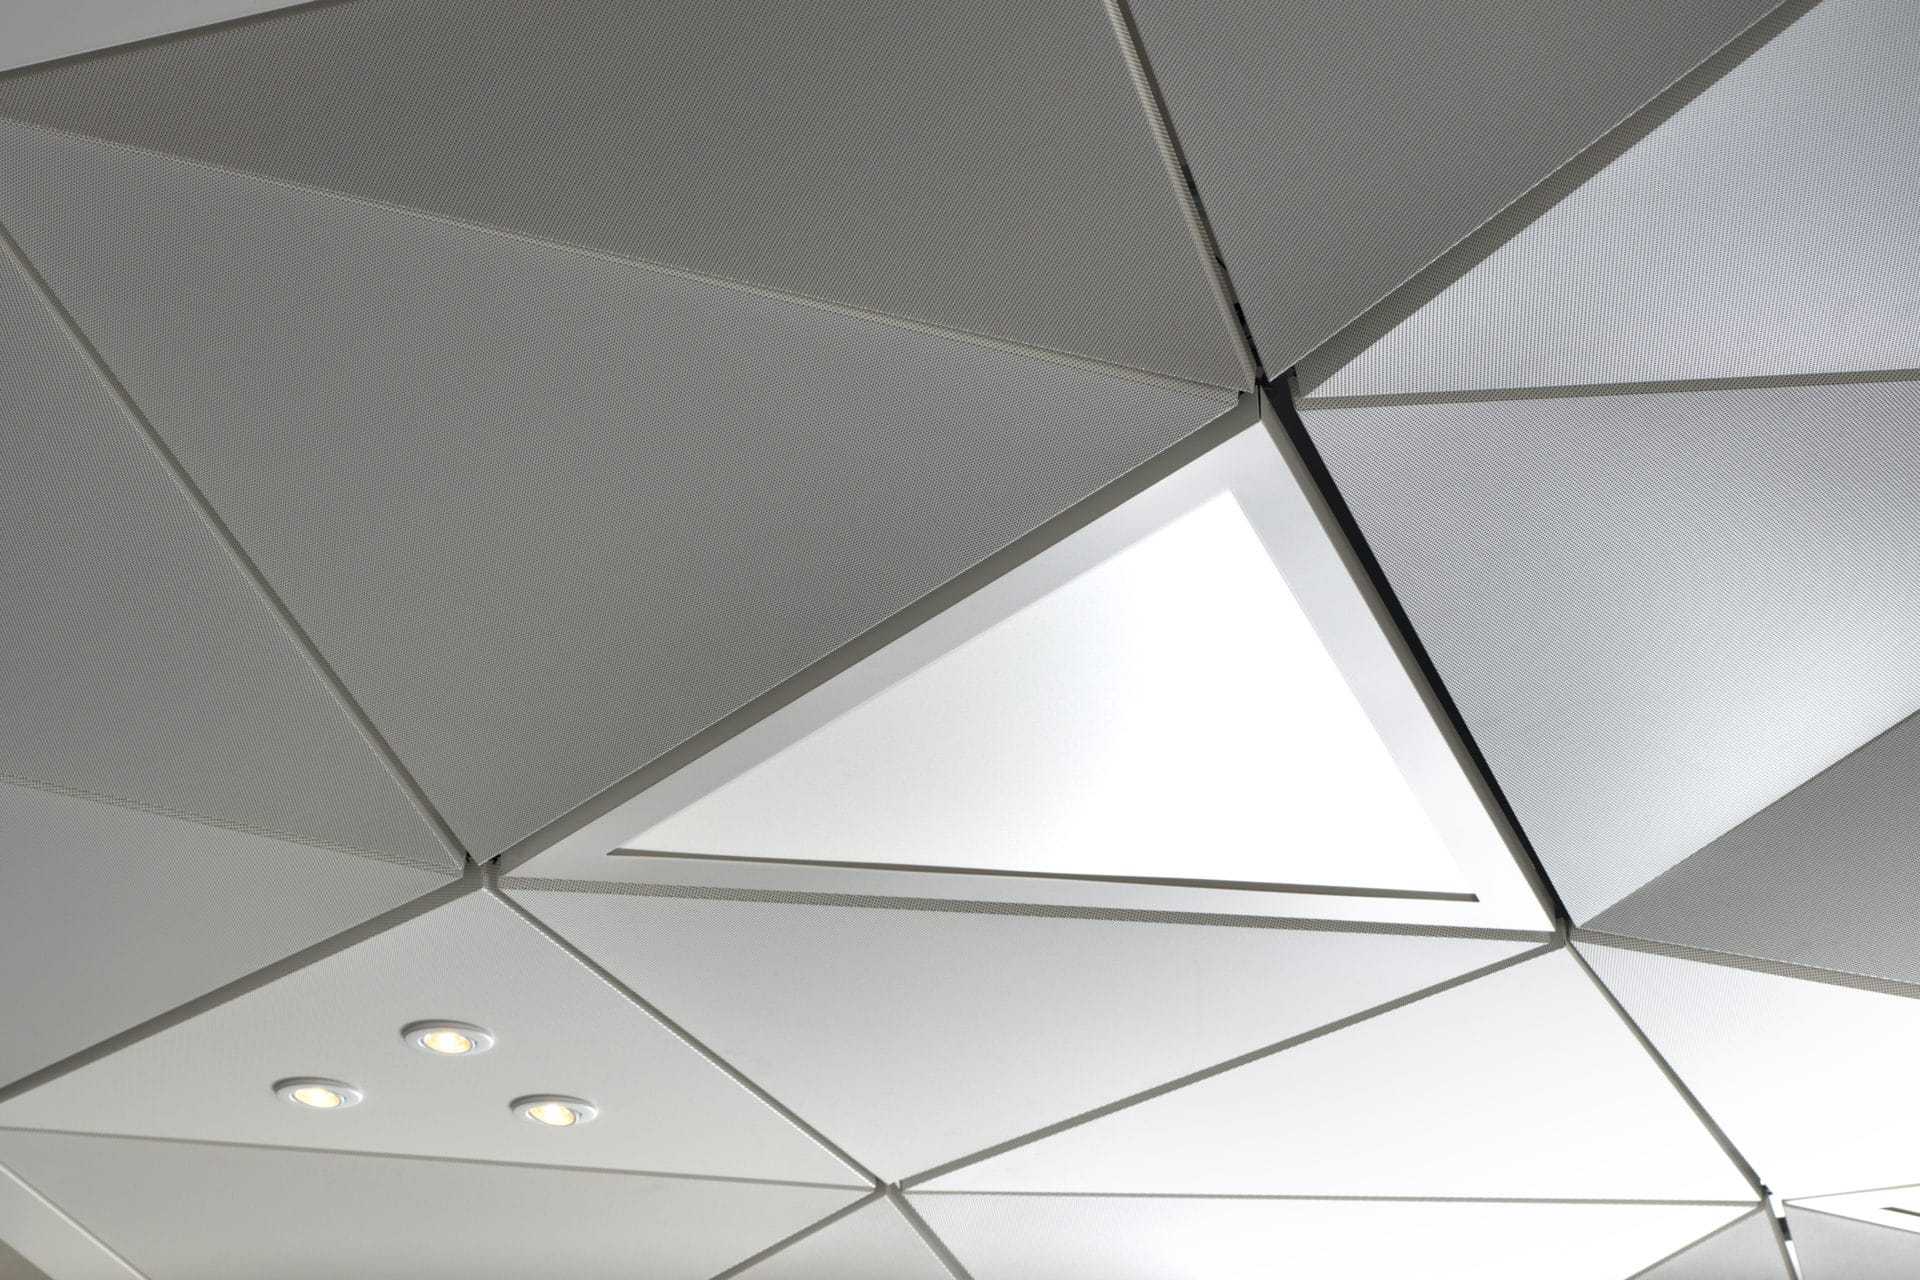 Adjustable suspended ceiling now available from SAS International